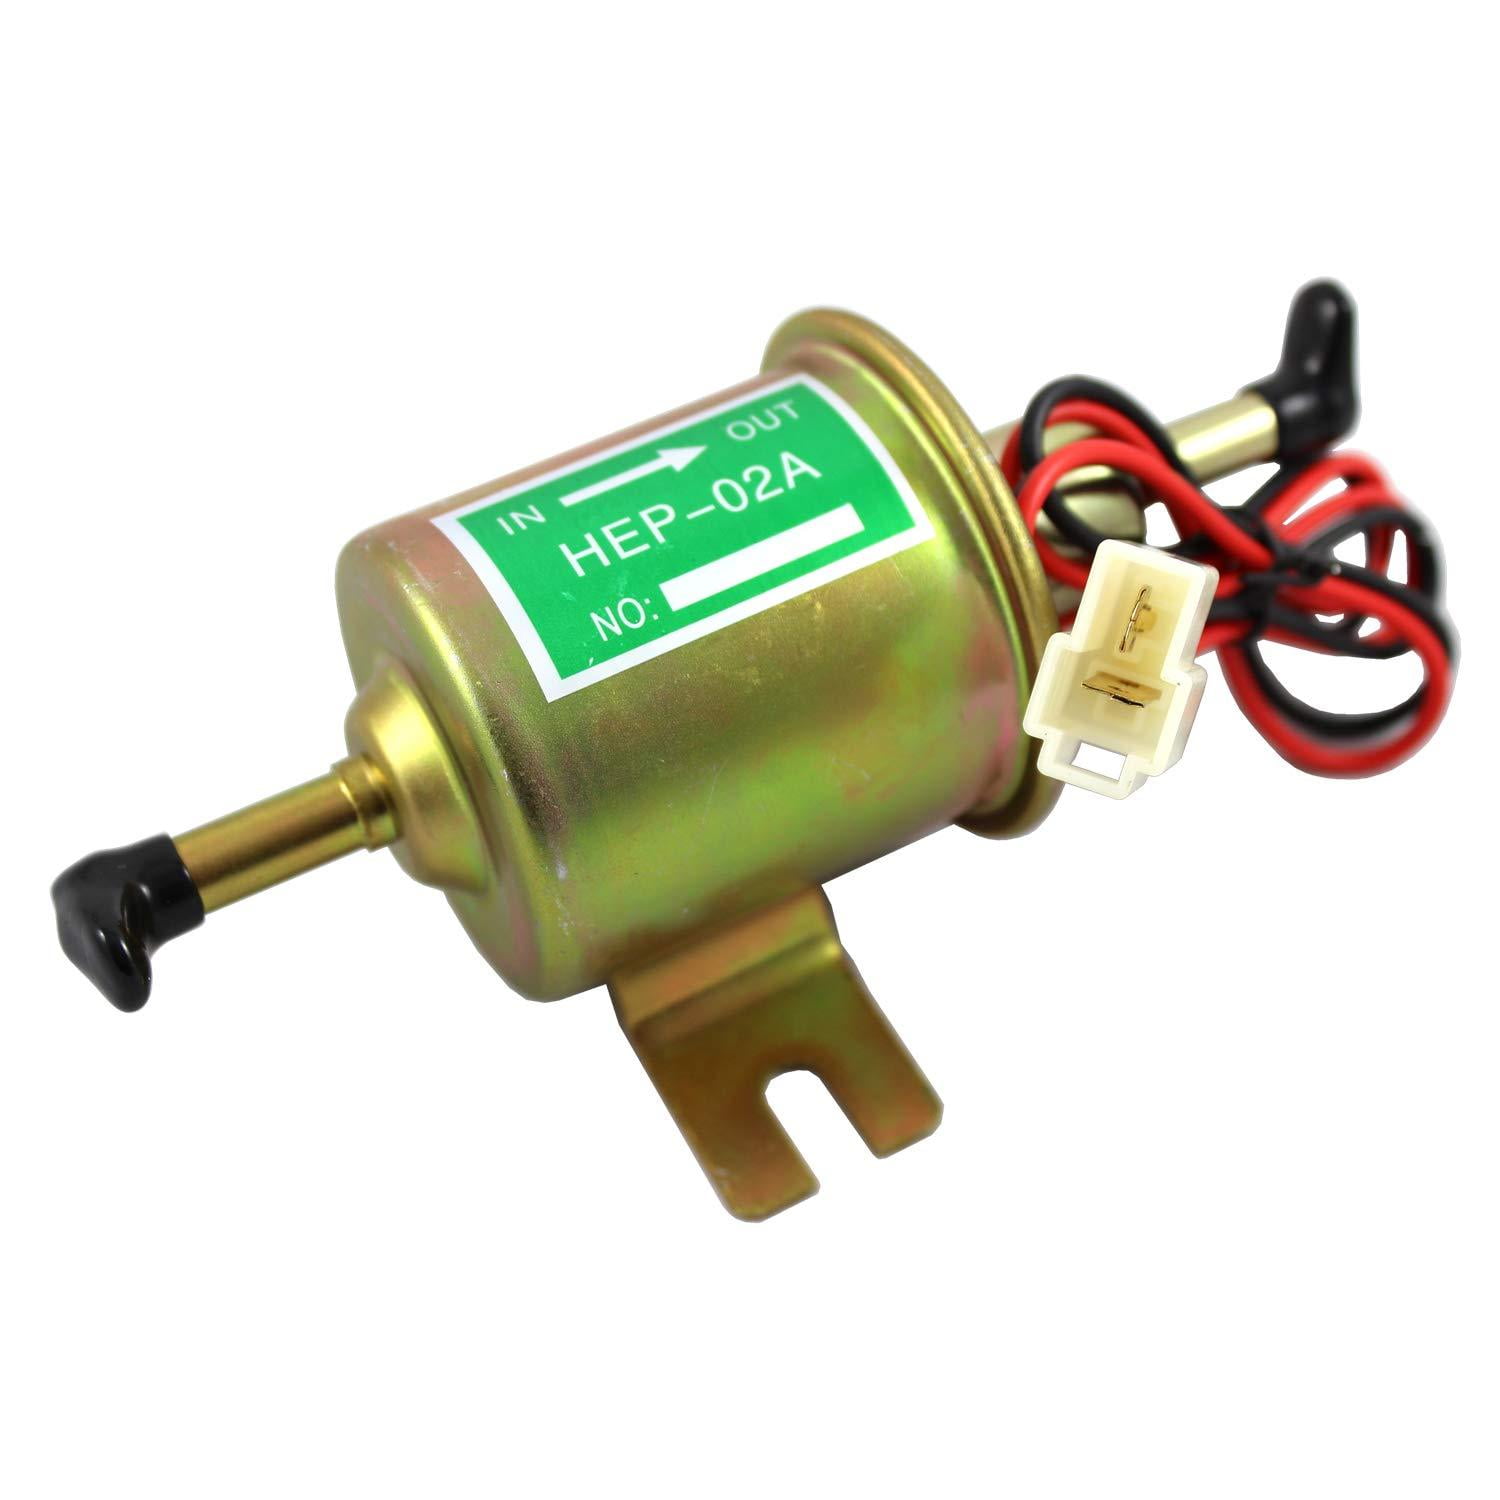 Shop Wholesale for New, Used and Rebuilt Hep 02a Fuel Pump